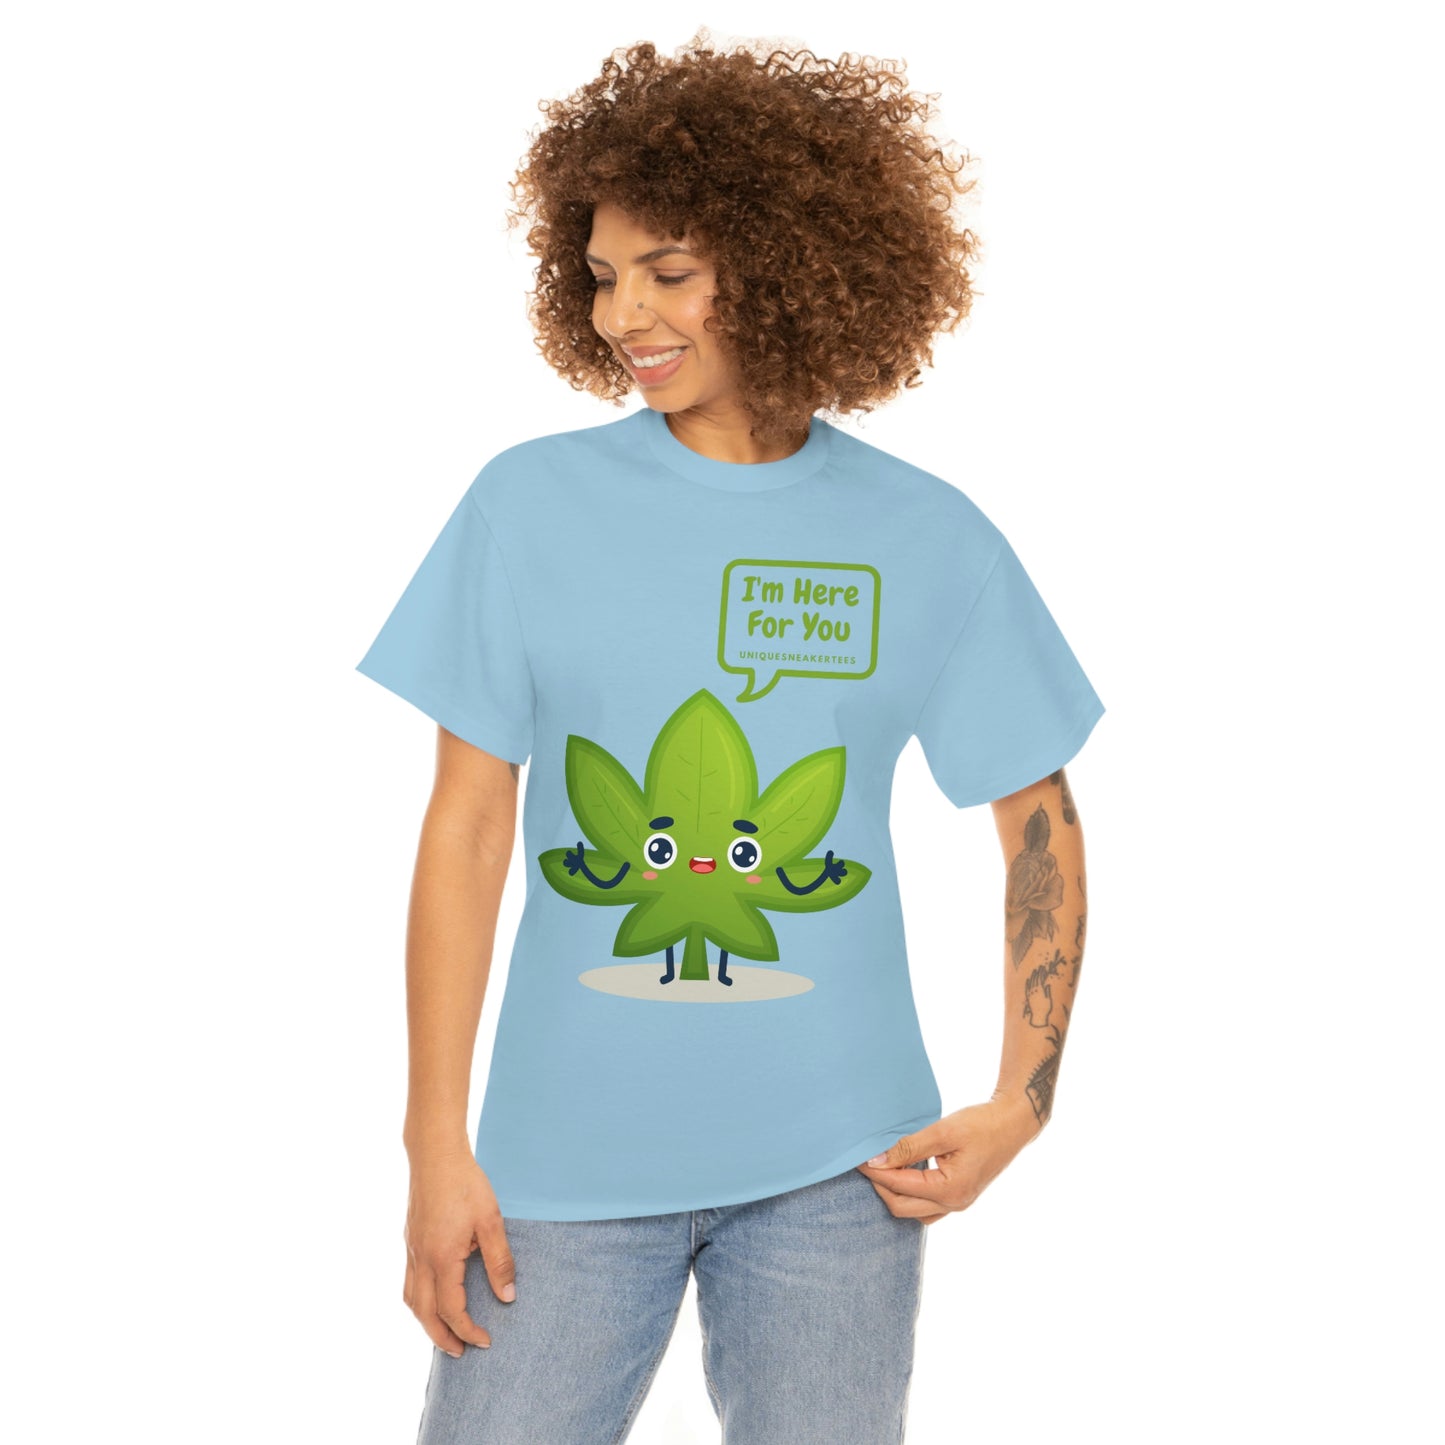 I'm Here For You 420 Tee